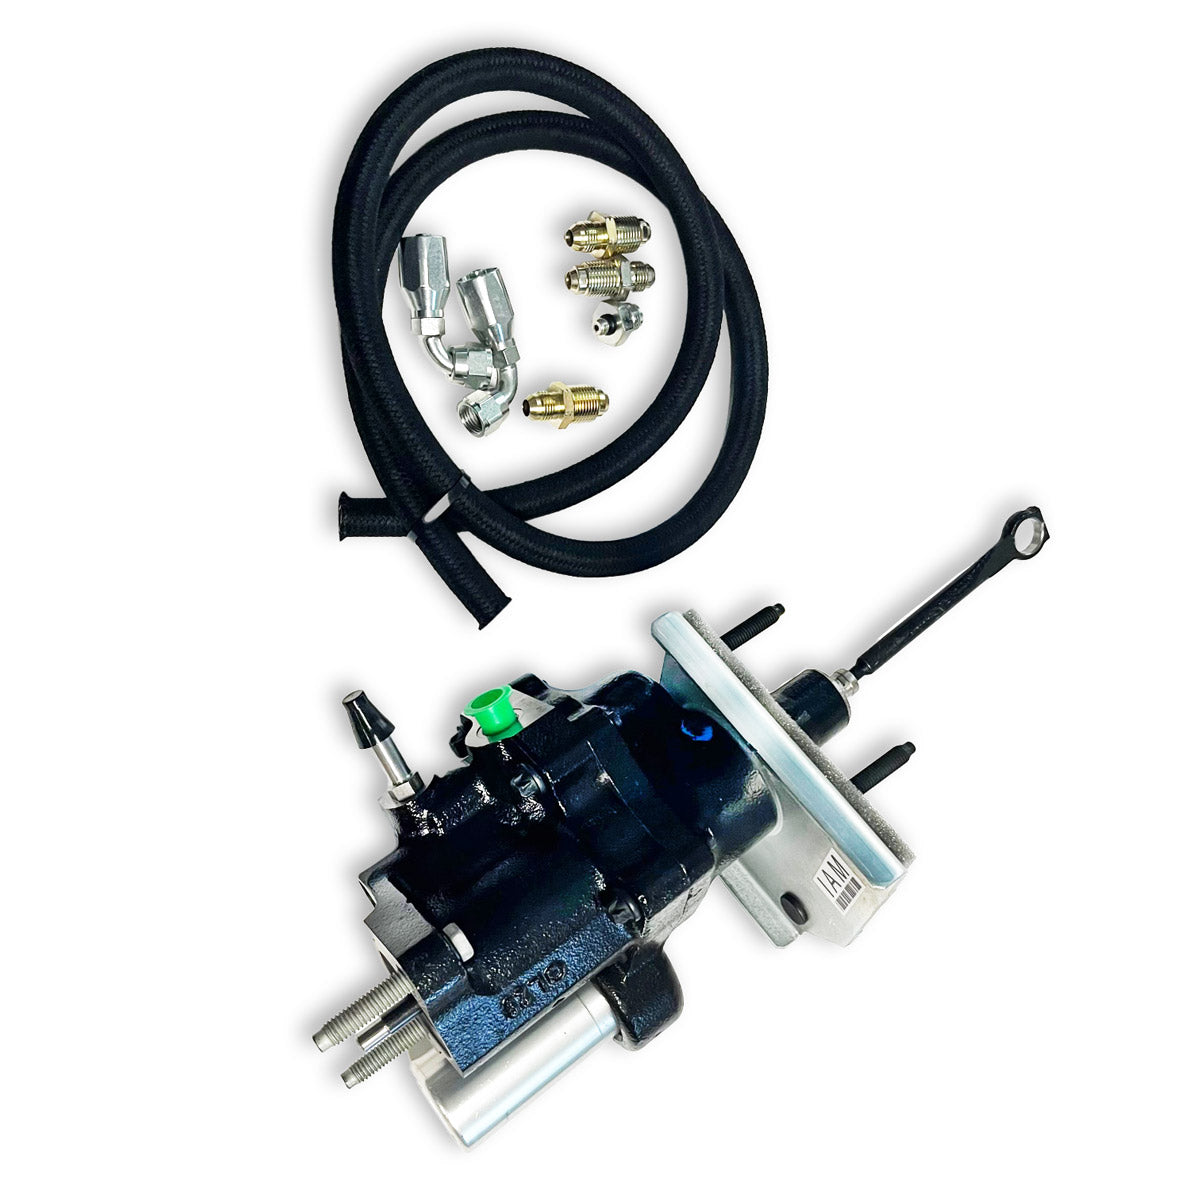 Bosch Hydroboost Unit with Lee's Internal High Flow Porting